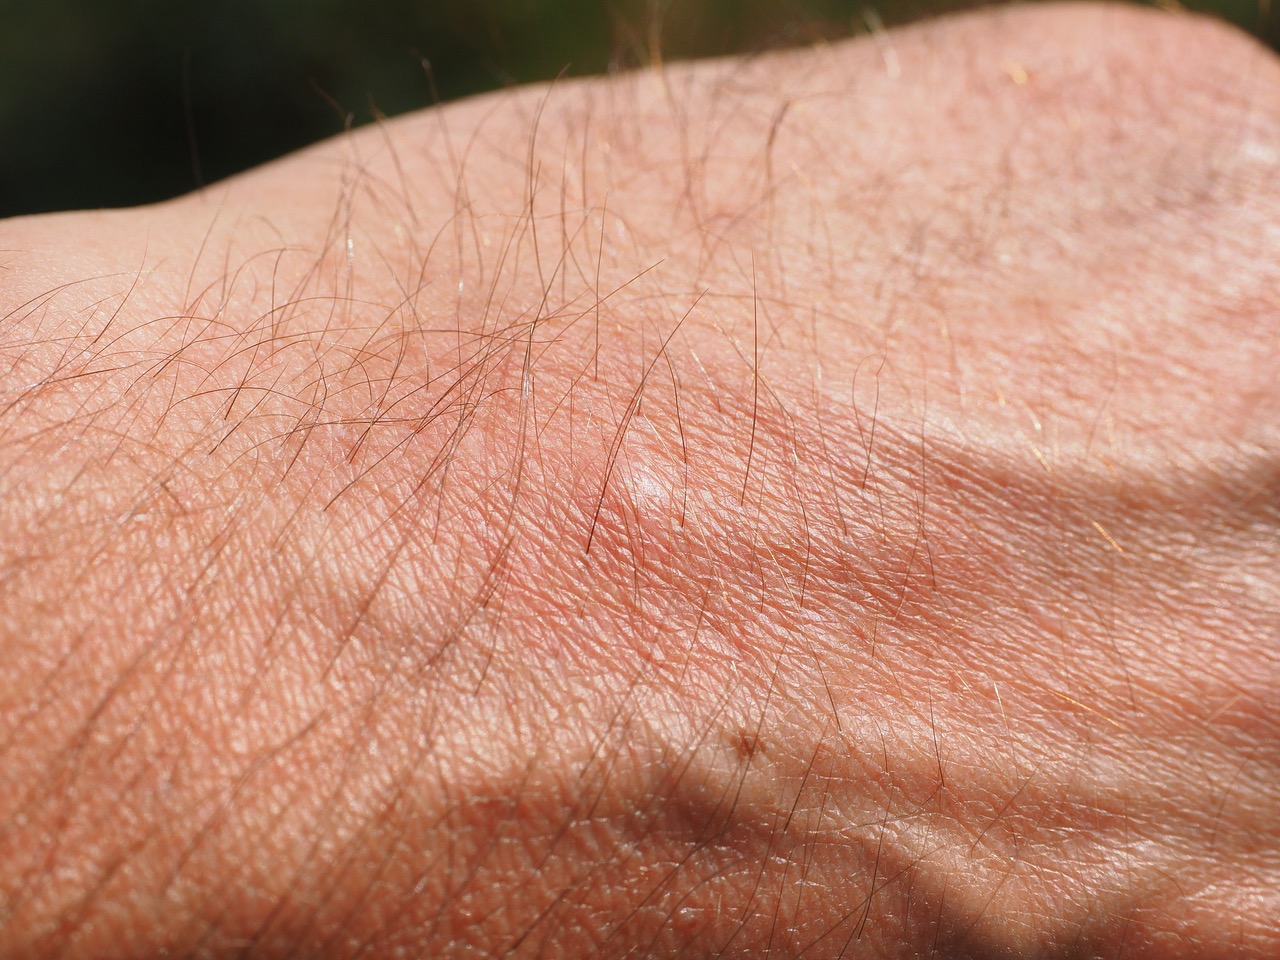 Mosquito Bite – Now what?